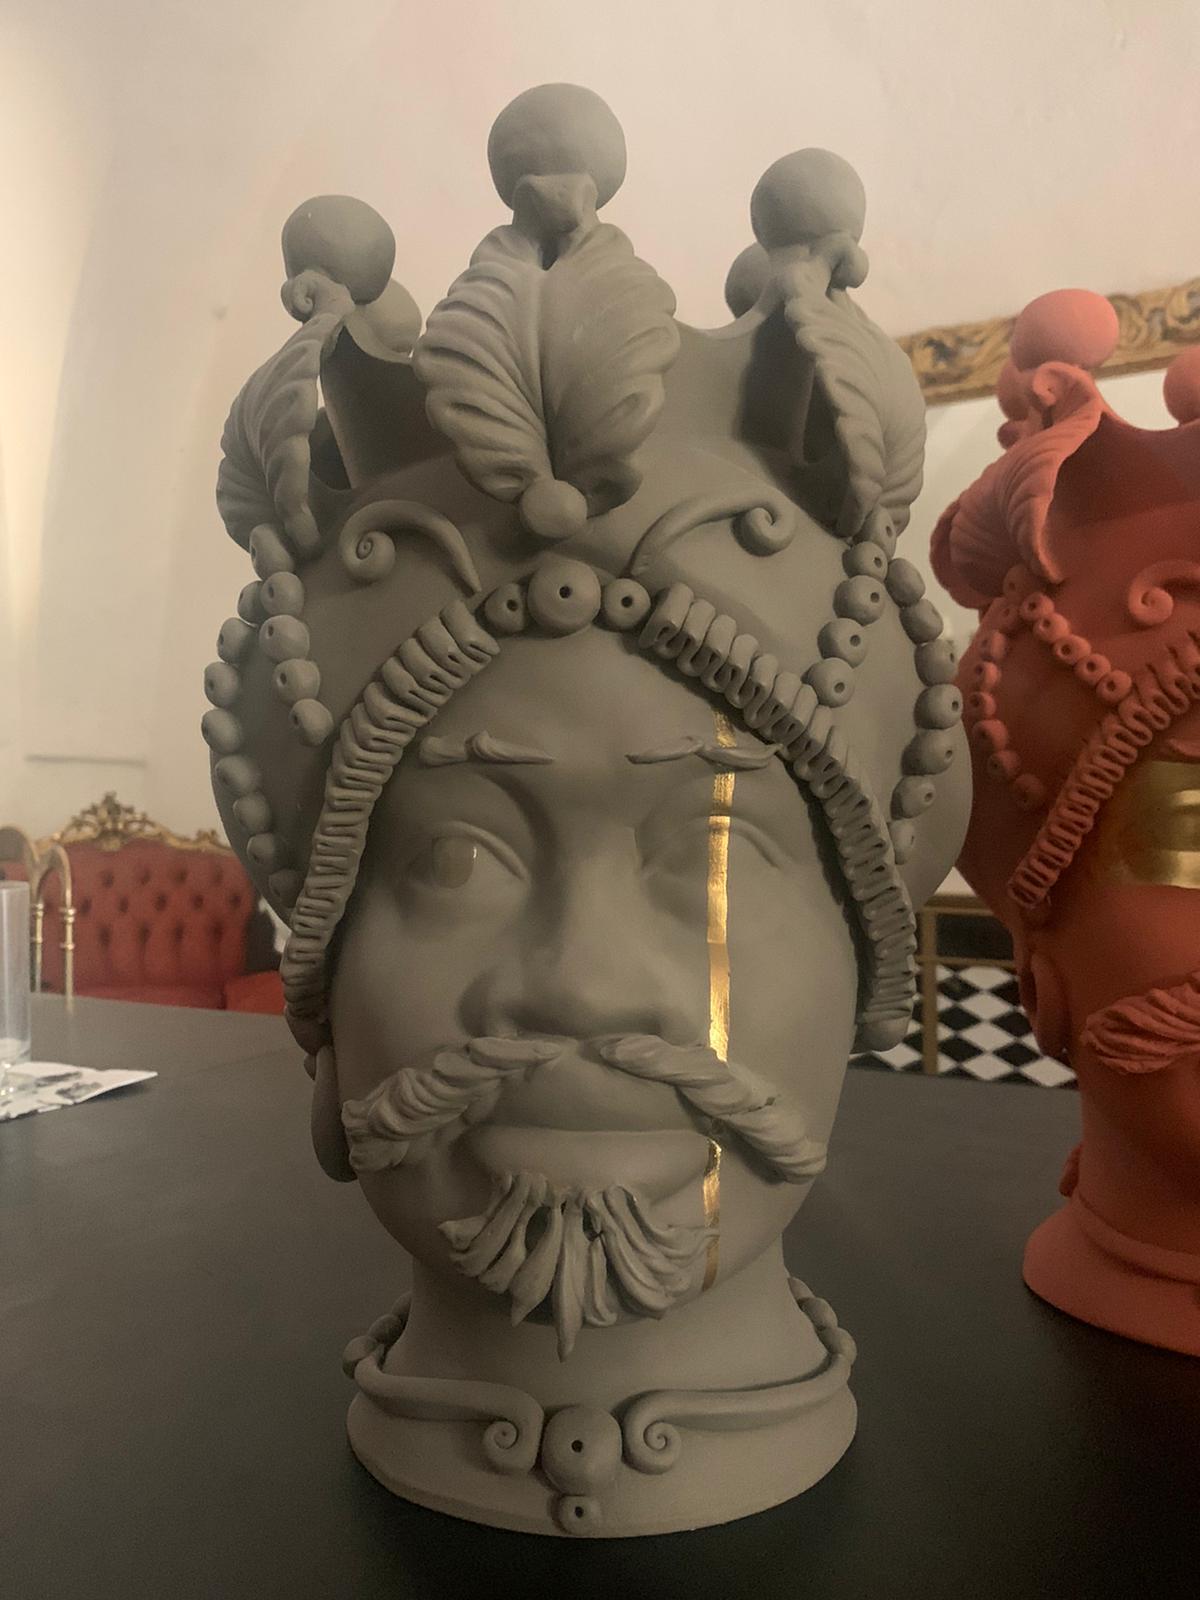 Italian Collection of 4 Vases Moor Head, Handmade in Italy, 2019, Unique Design For Sale